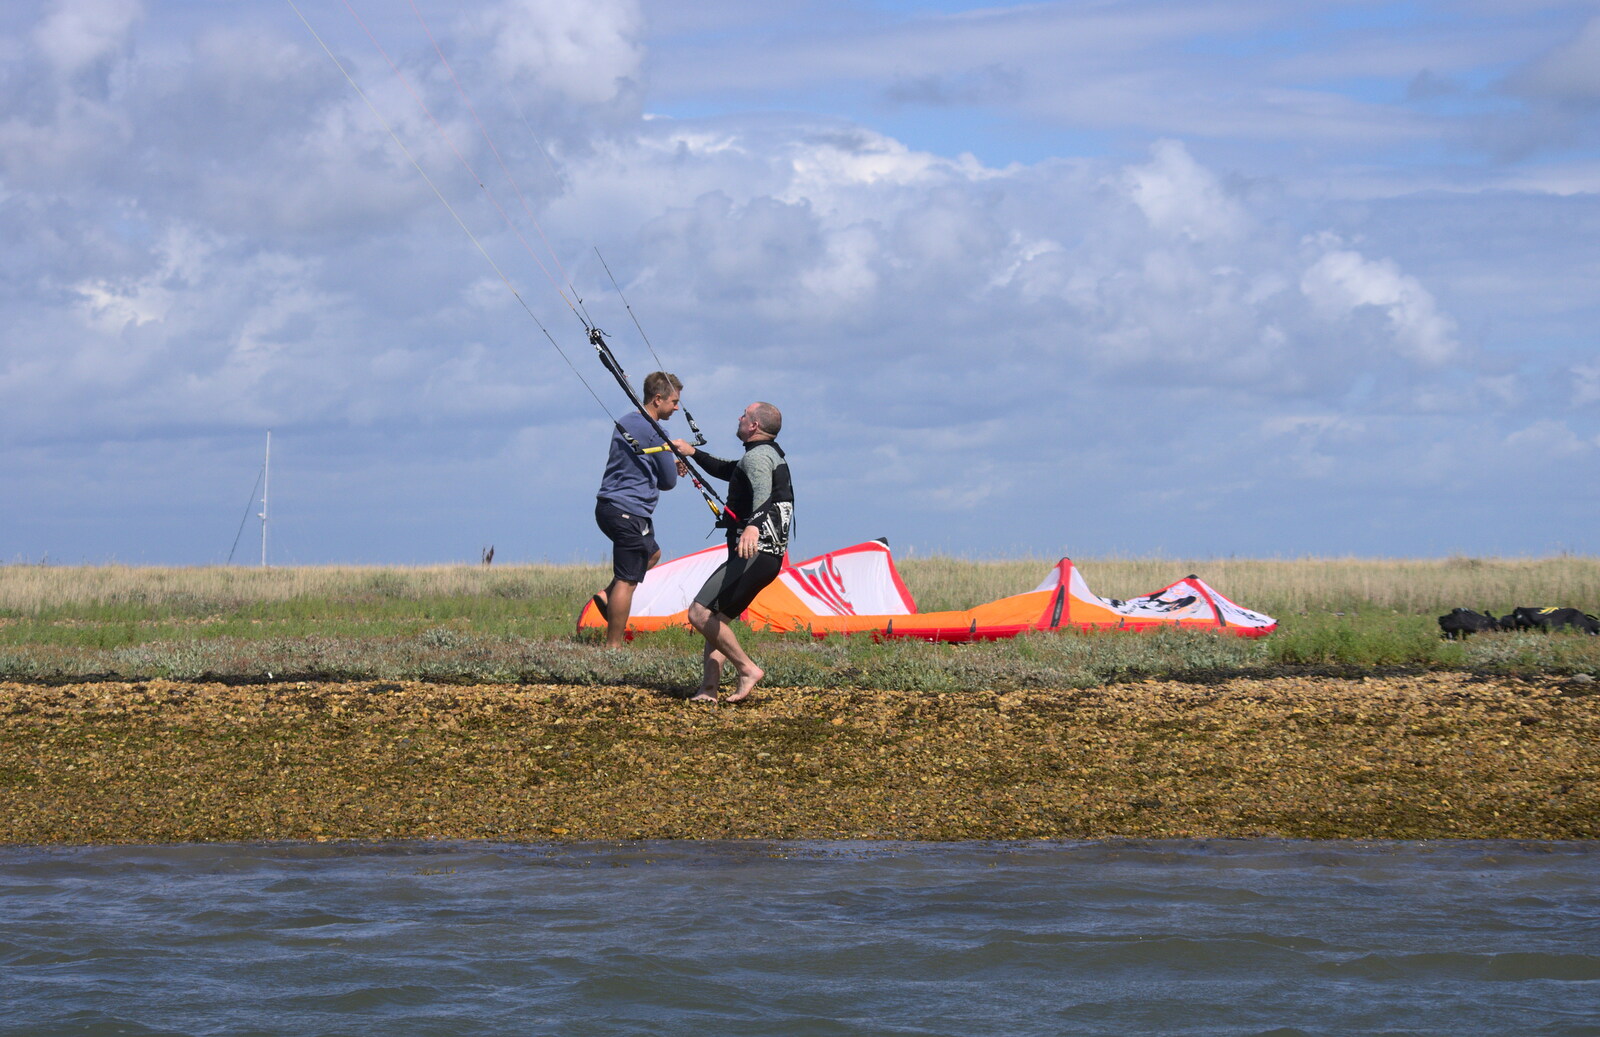 Some dudes do kite surfing from A Trip to Hurst Castle, Keyhaven, Hampshire - 28th August 2015